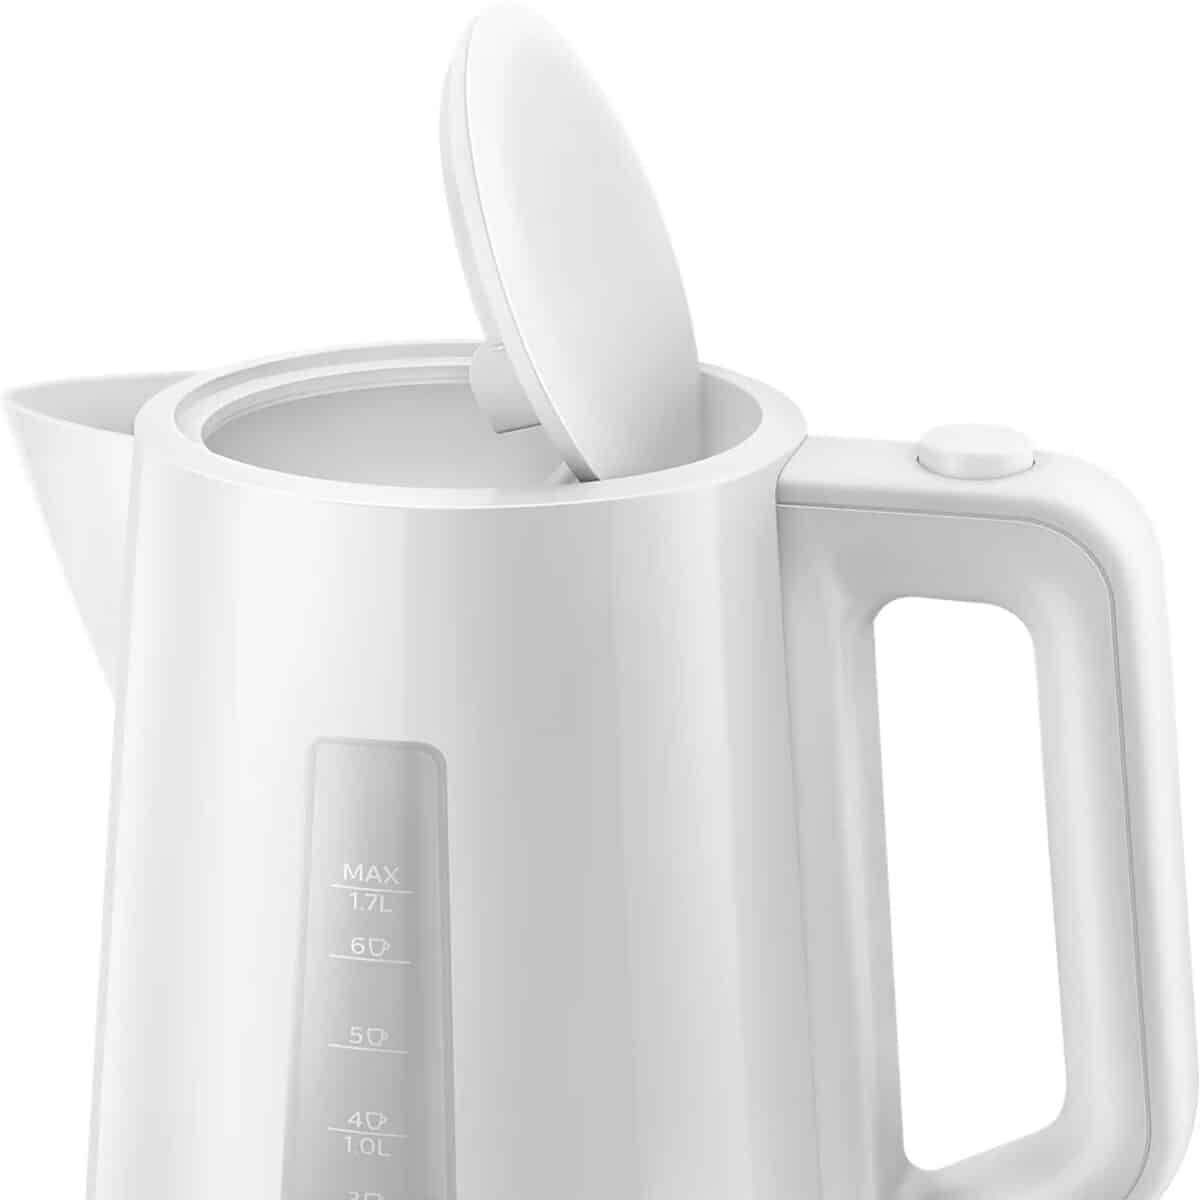 Philips 1.7L Kettle – HD9318/01 White